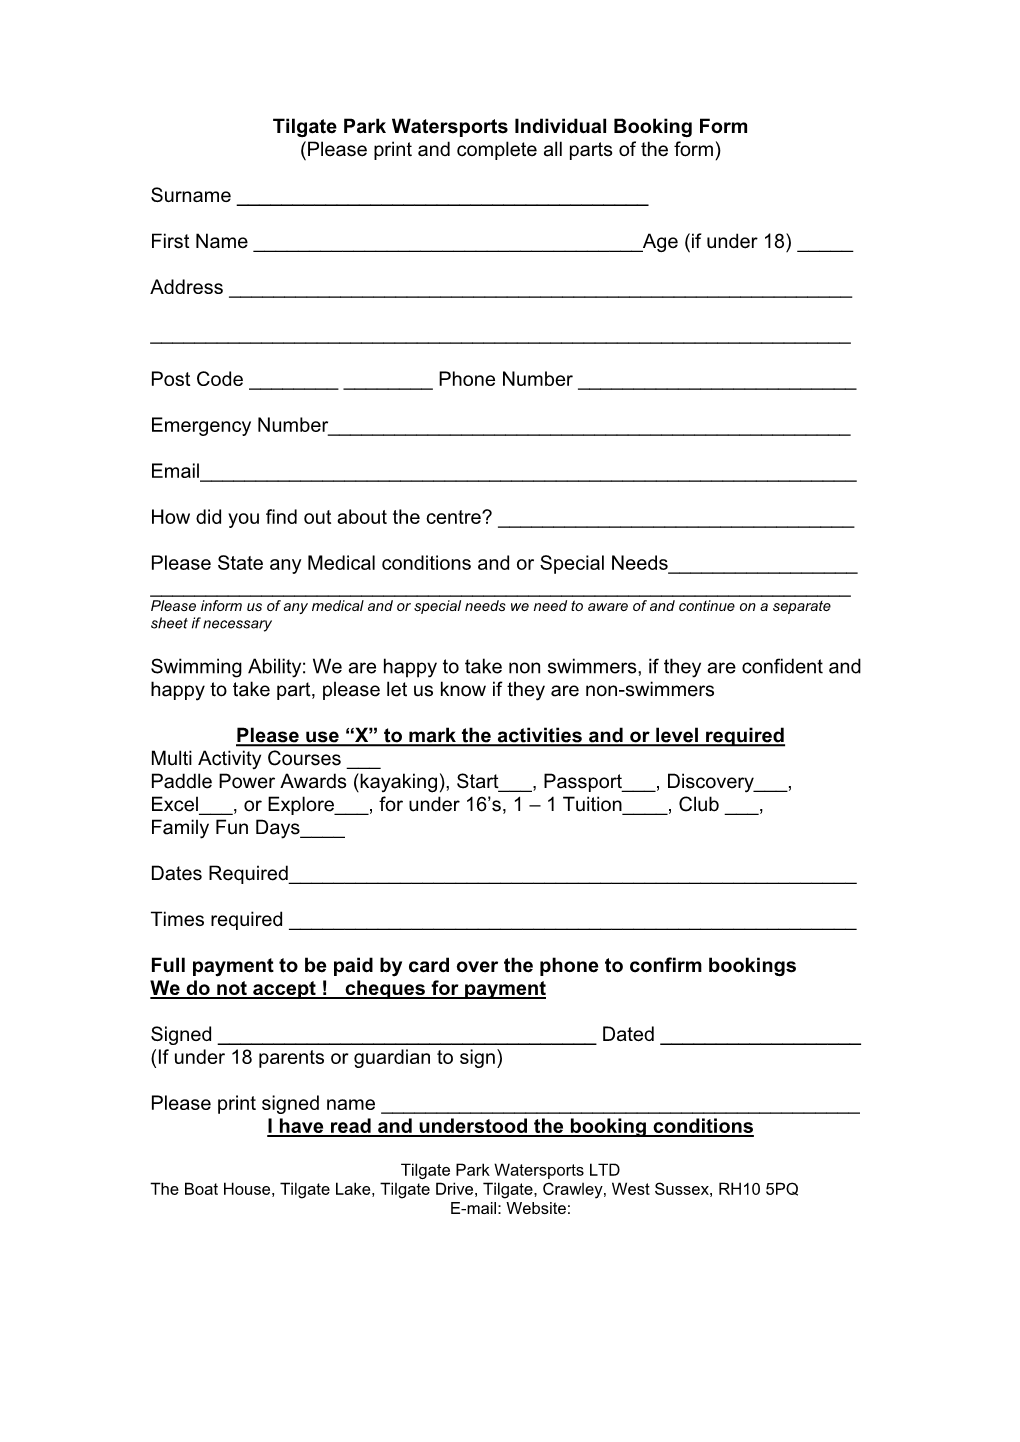 Tilgate Park Watersports Individual Booking Form (Please Print and Complete All Parts of the Form)